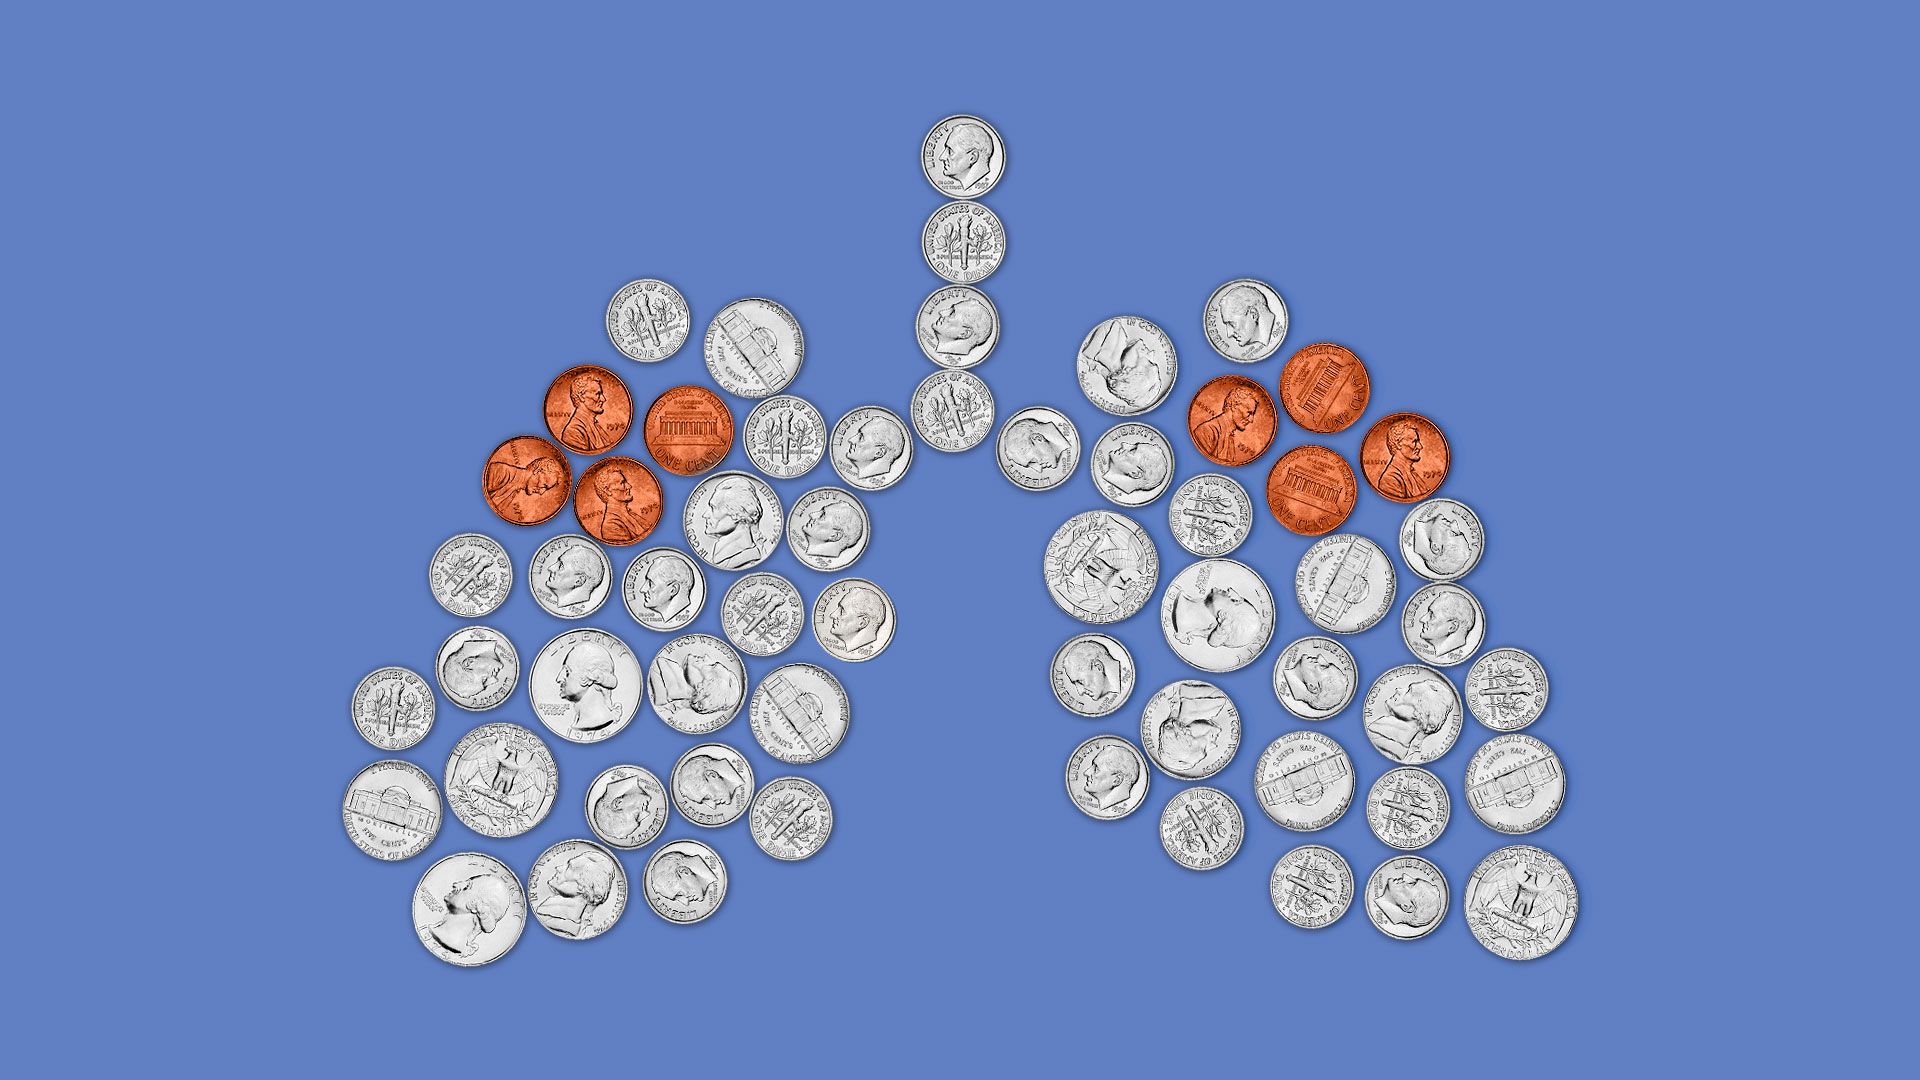 Illustration of lungs made of coins, with a couple differently colored (copper pennies with silver nickels)